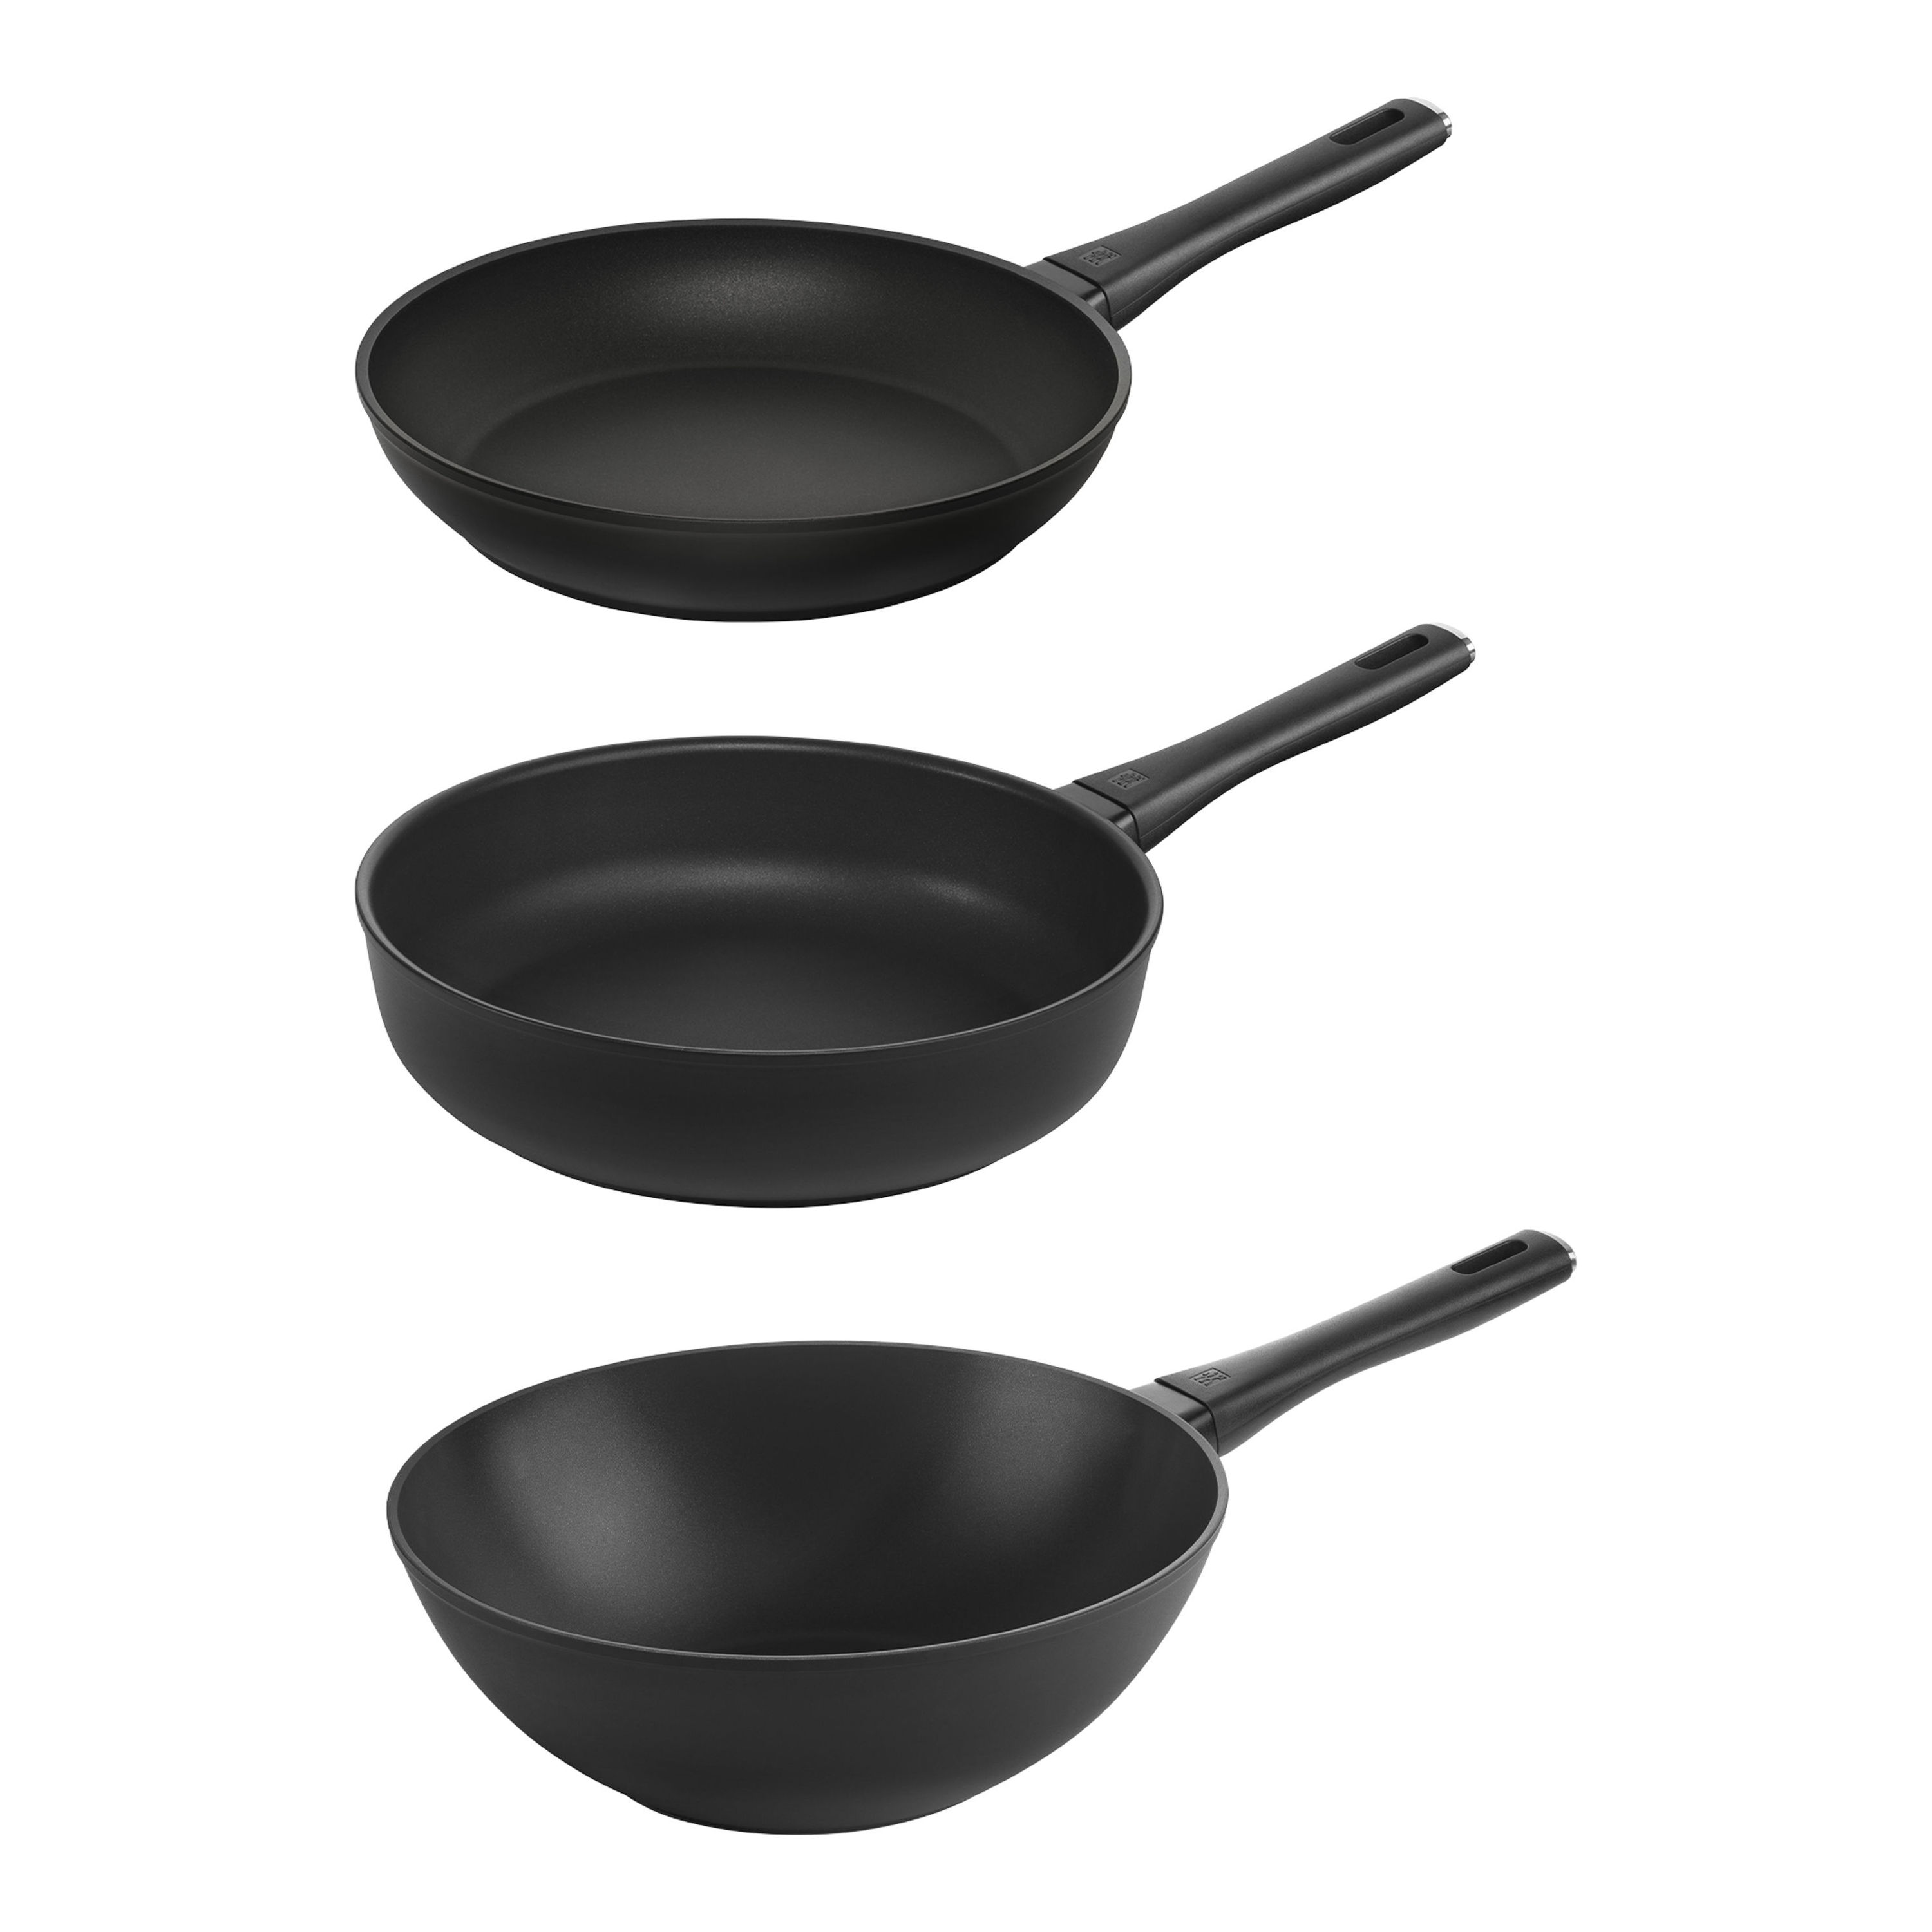 The Zwilling Madura Plus Is The Best Nonstick Pan for Any Home Cook